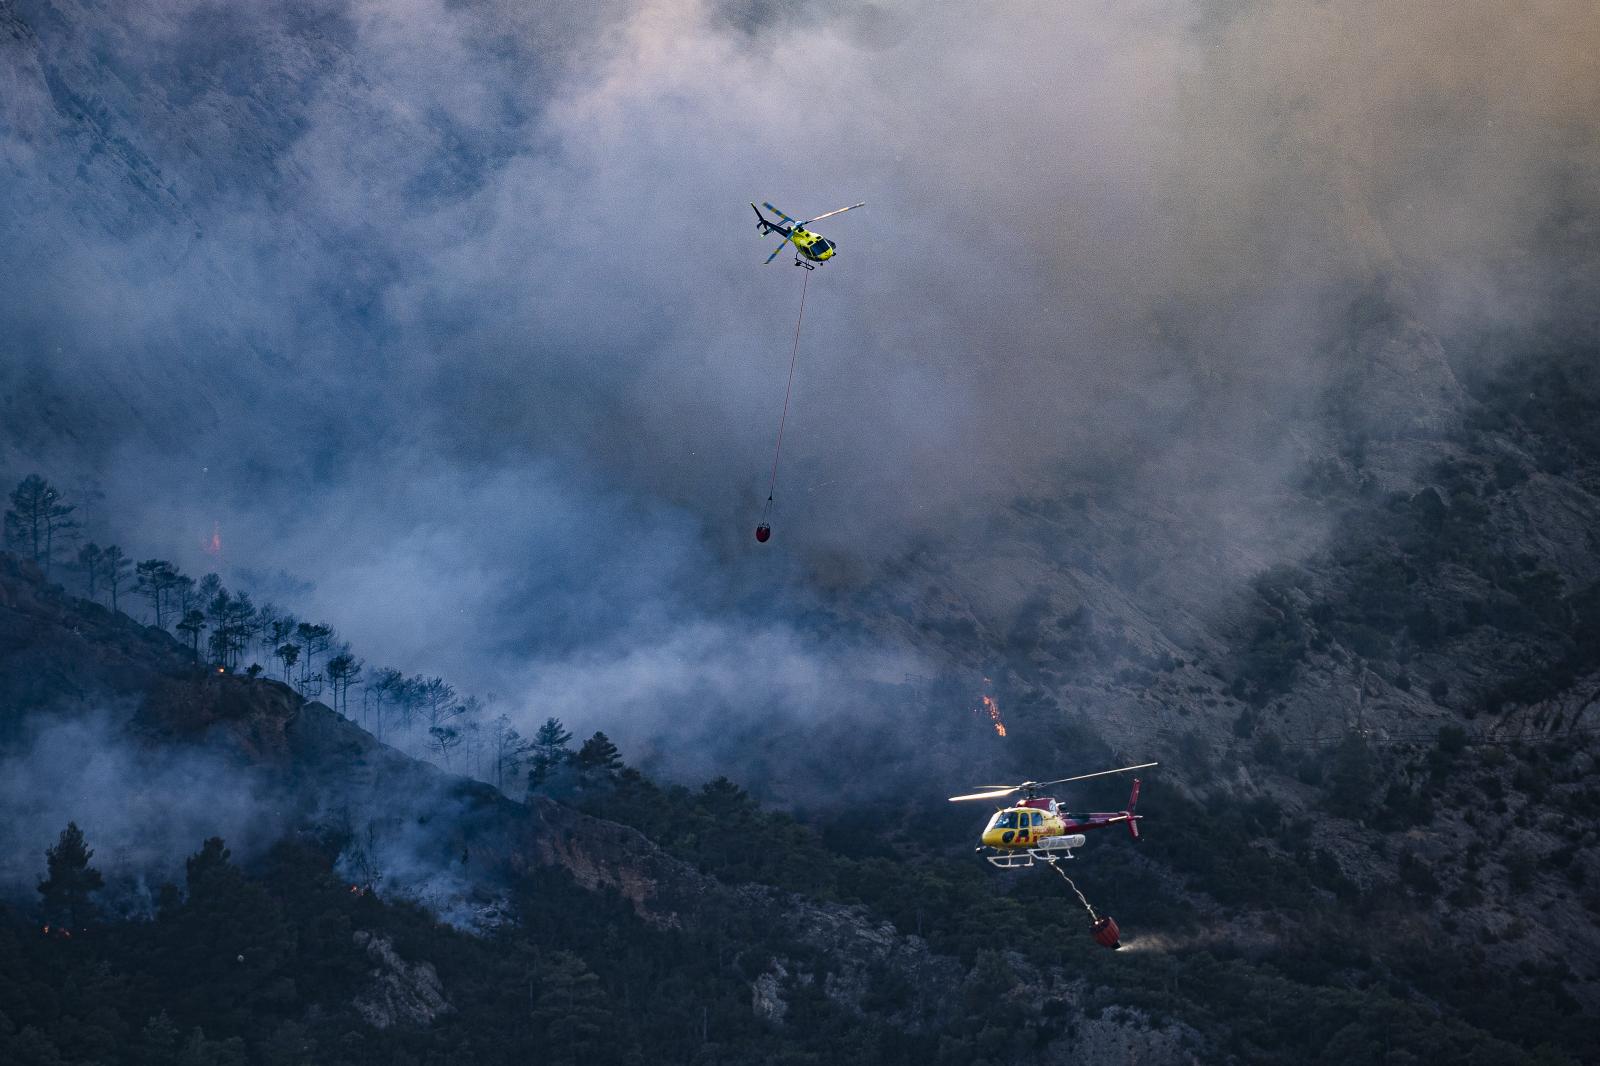 Image from DAILY NEWS - Two firefighting helicopters of firefighters are working...